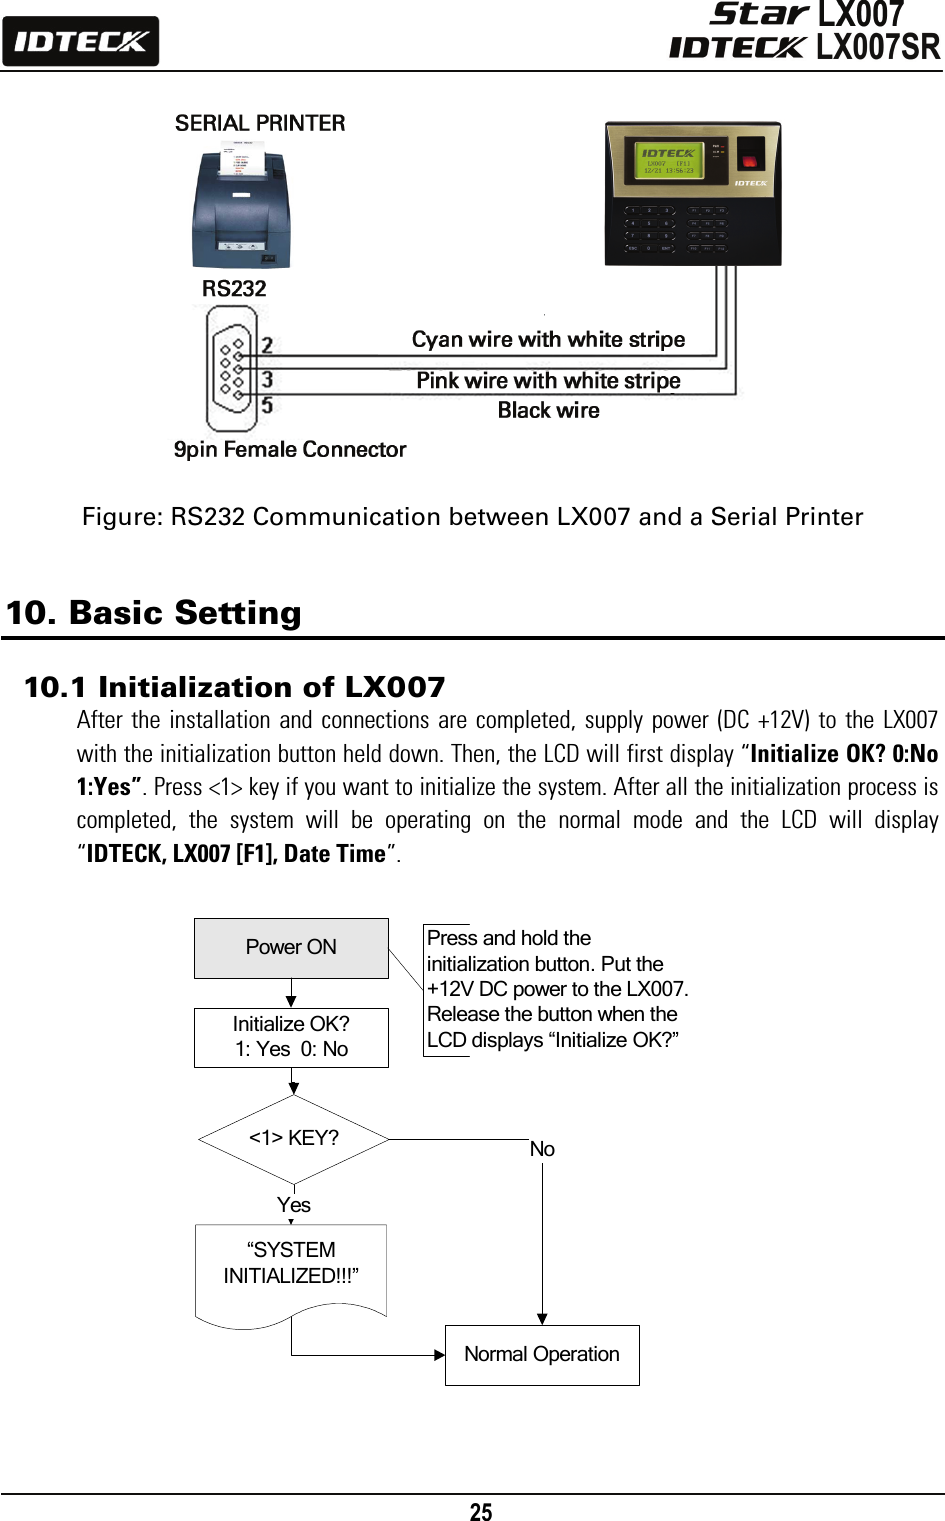                                                                                    25      &lt;1&gt; KEY?“SYSTEM INITIALIZED!!!”Power ONInitialize OK?1: Yes  0: NoNormal OperationYesNoPress and hold the initialization button. Put the +12V DC power to the LX007. Release the button when the LCD displays “Initialize OK?”               Figure: RS232 Communication between LX007 and a Serial Printer   10. Basic Setting  10.1 Initialization of LX007 After the installation and connections are completed, supply power (DC +12V) to the LX007 with the initialization button held down. Then, the LCD will first display “Initialize OK? 0:No 1:Yes”. Press &lt;1&gt; key if you want to initialize the system. After all the initialization process is completed, the system will be operating on the normal mode and the LCD will display “IDTECK, LX007 [F1], Date Time”.                    